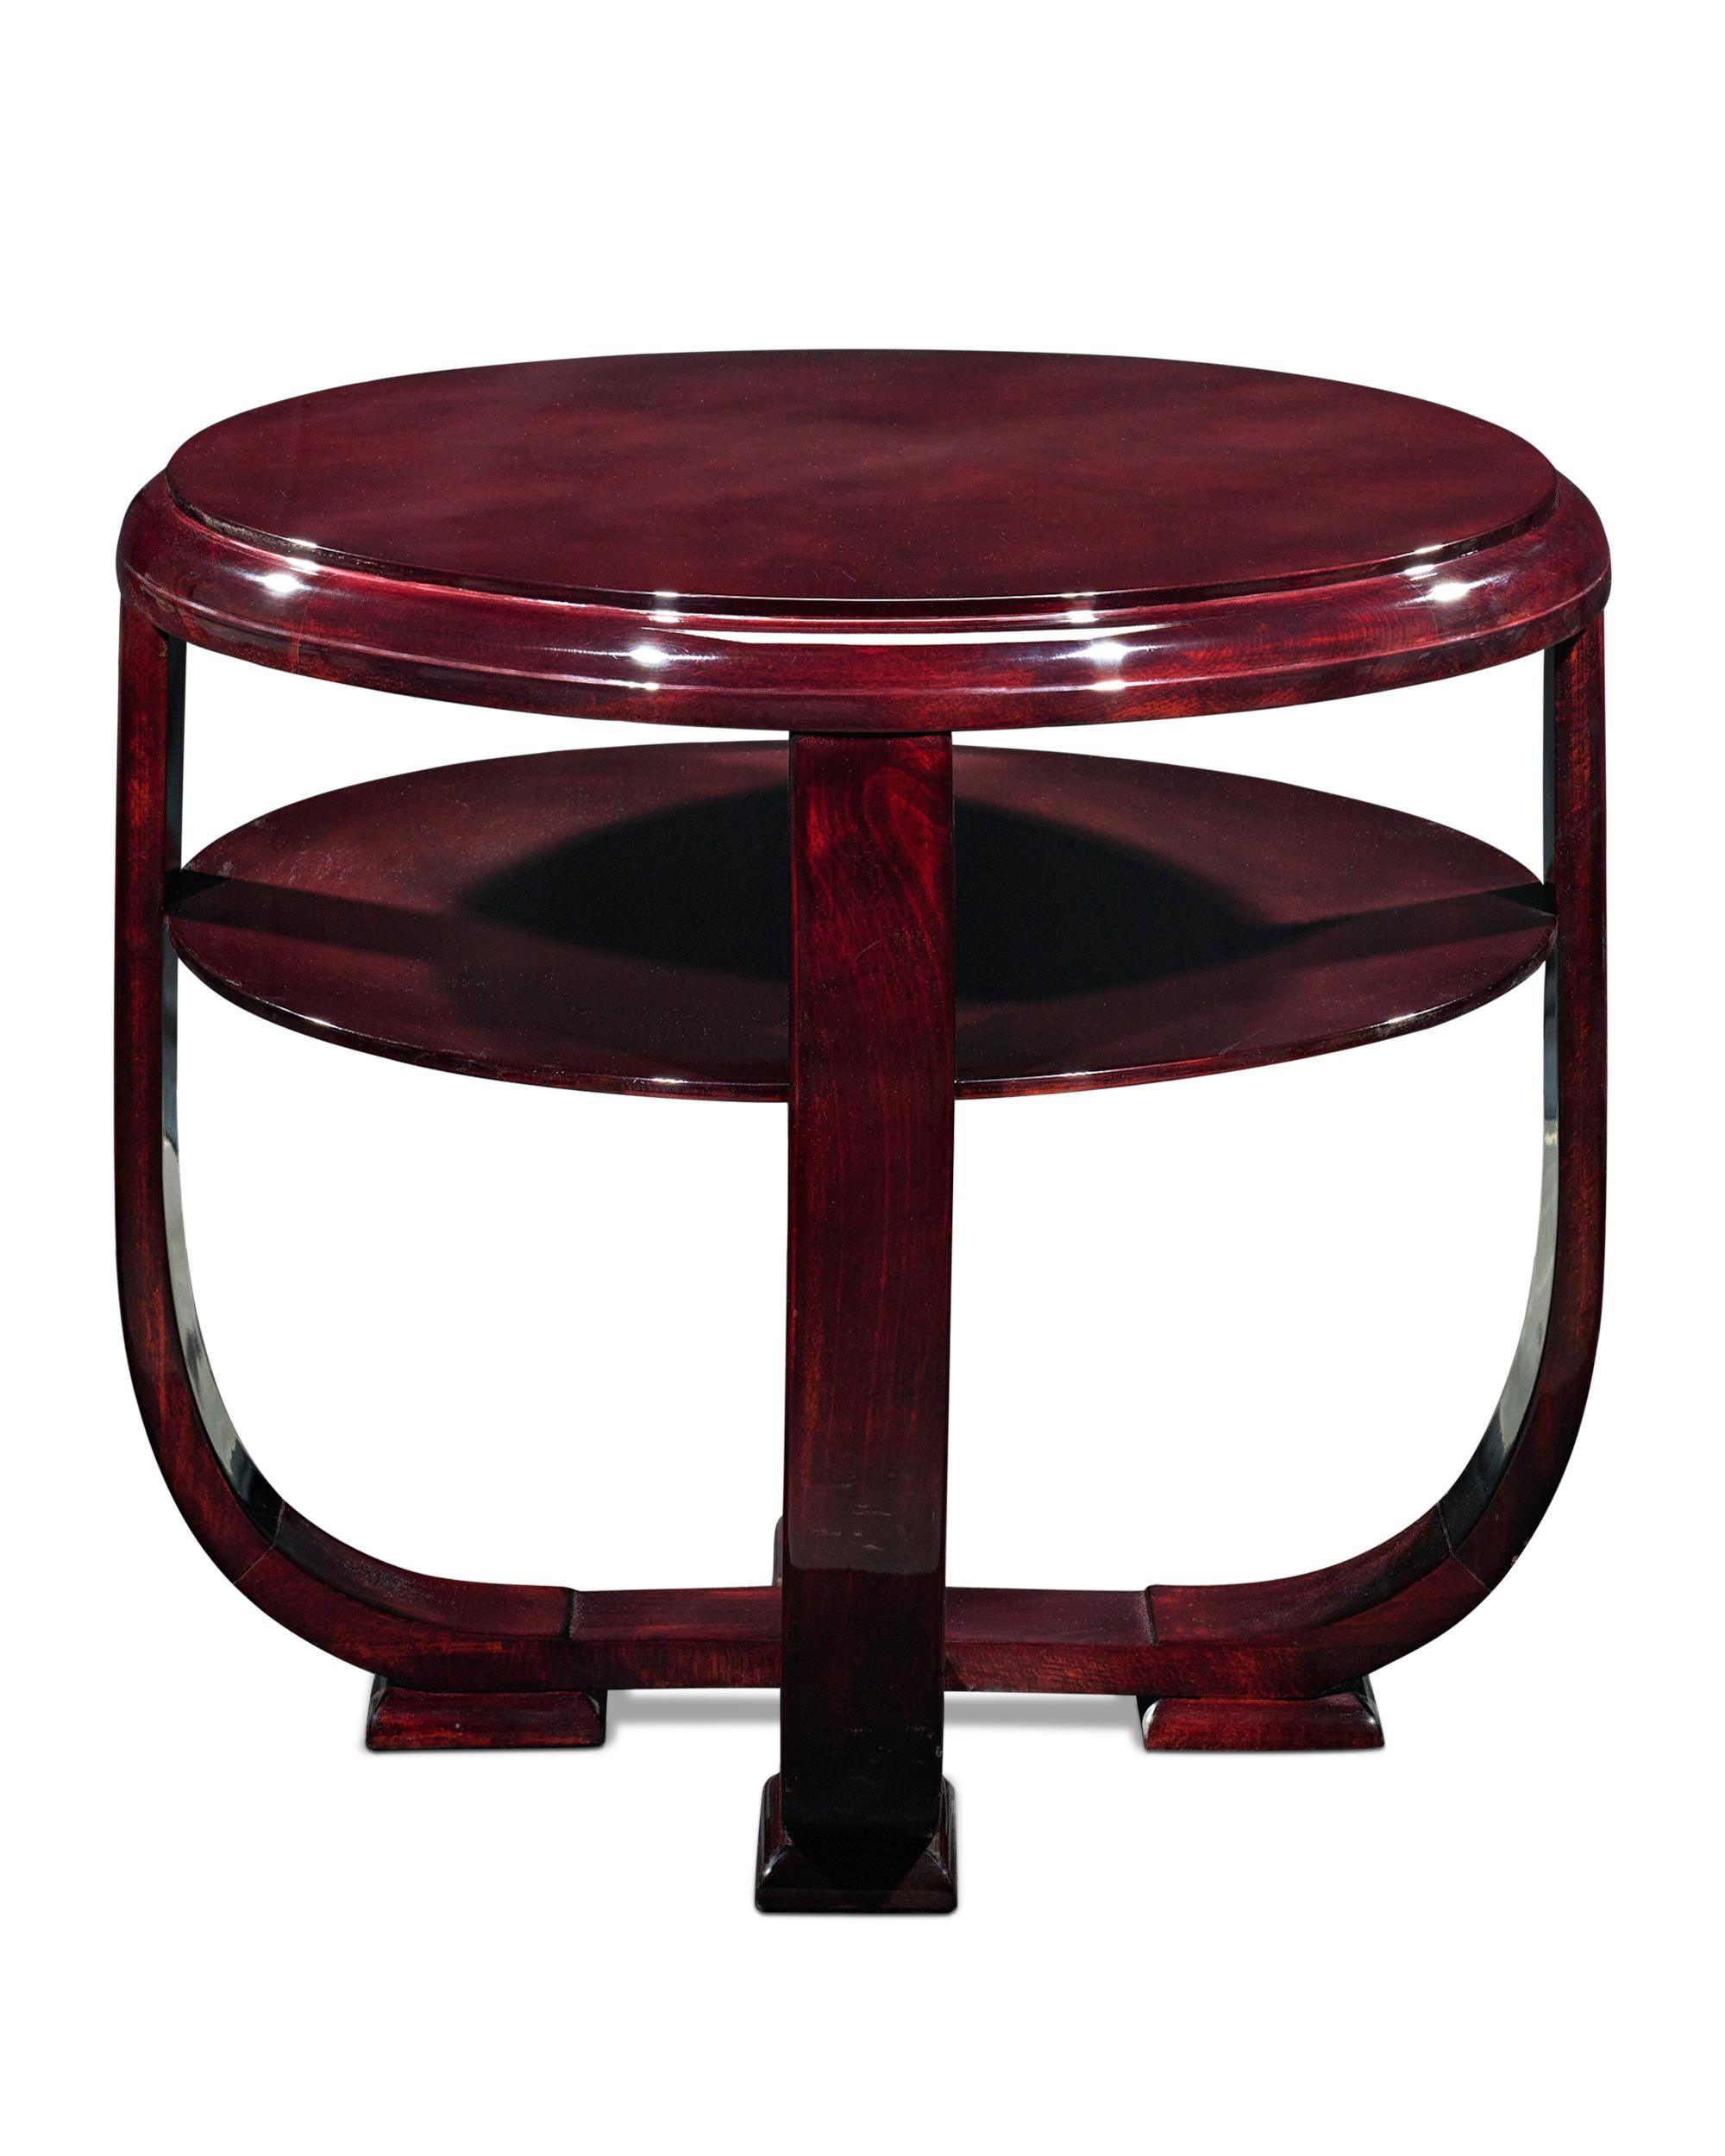 This magnificent Art Deco coffee table is crafted of fine, polished mahogany, displaying the highest level of form and functionality of the early 1920s. Interest in Art Deco furnishings has increased dramatically and quality period examples, such as